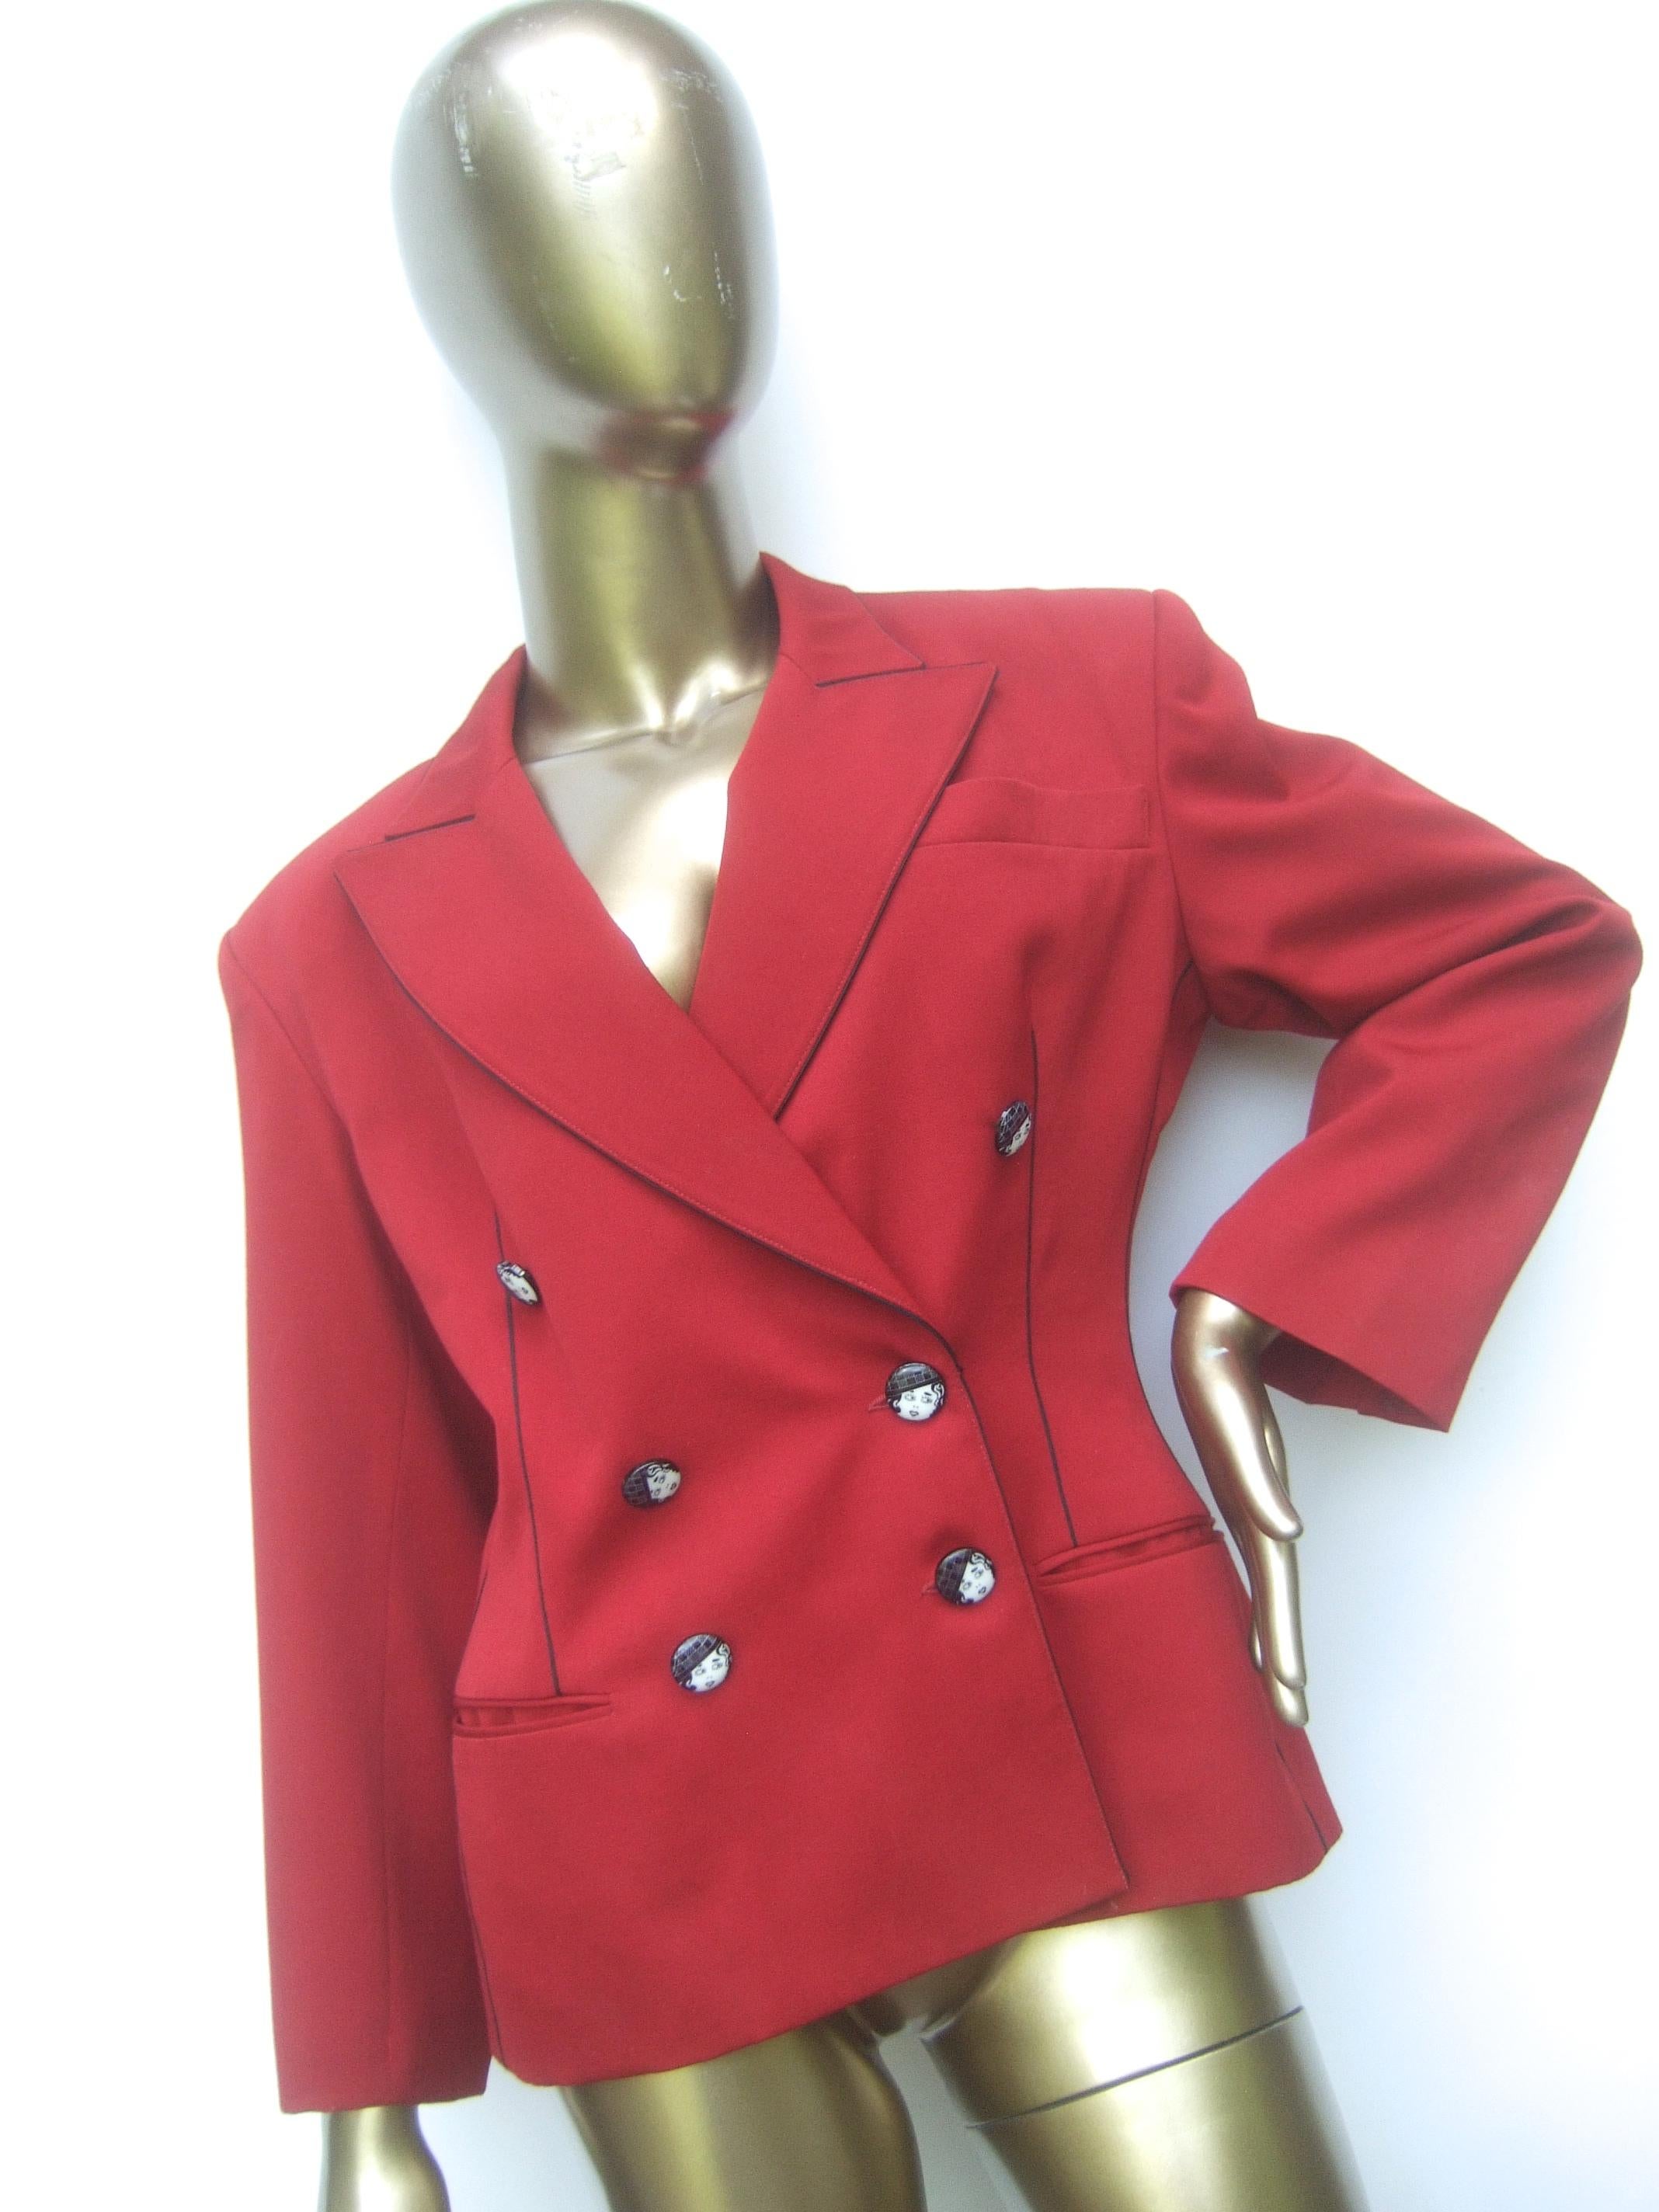 Lolita Lempicka Paris Red Wool Face Button Double-Breasted Blazer c 1980s For Sale 1